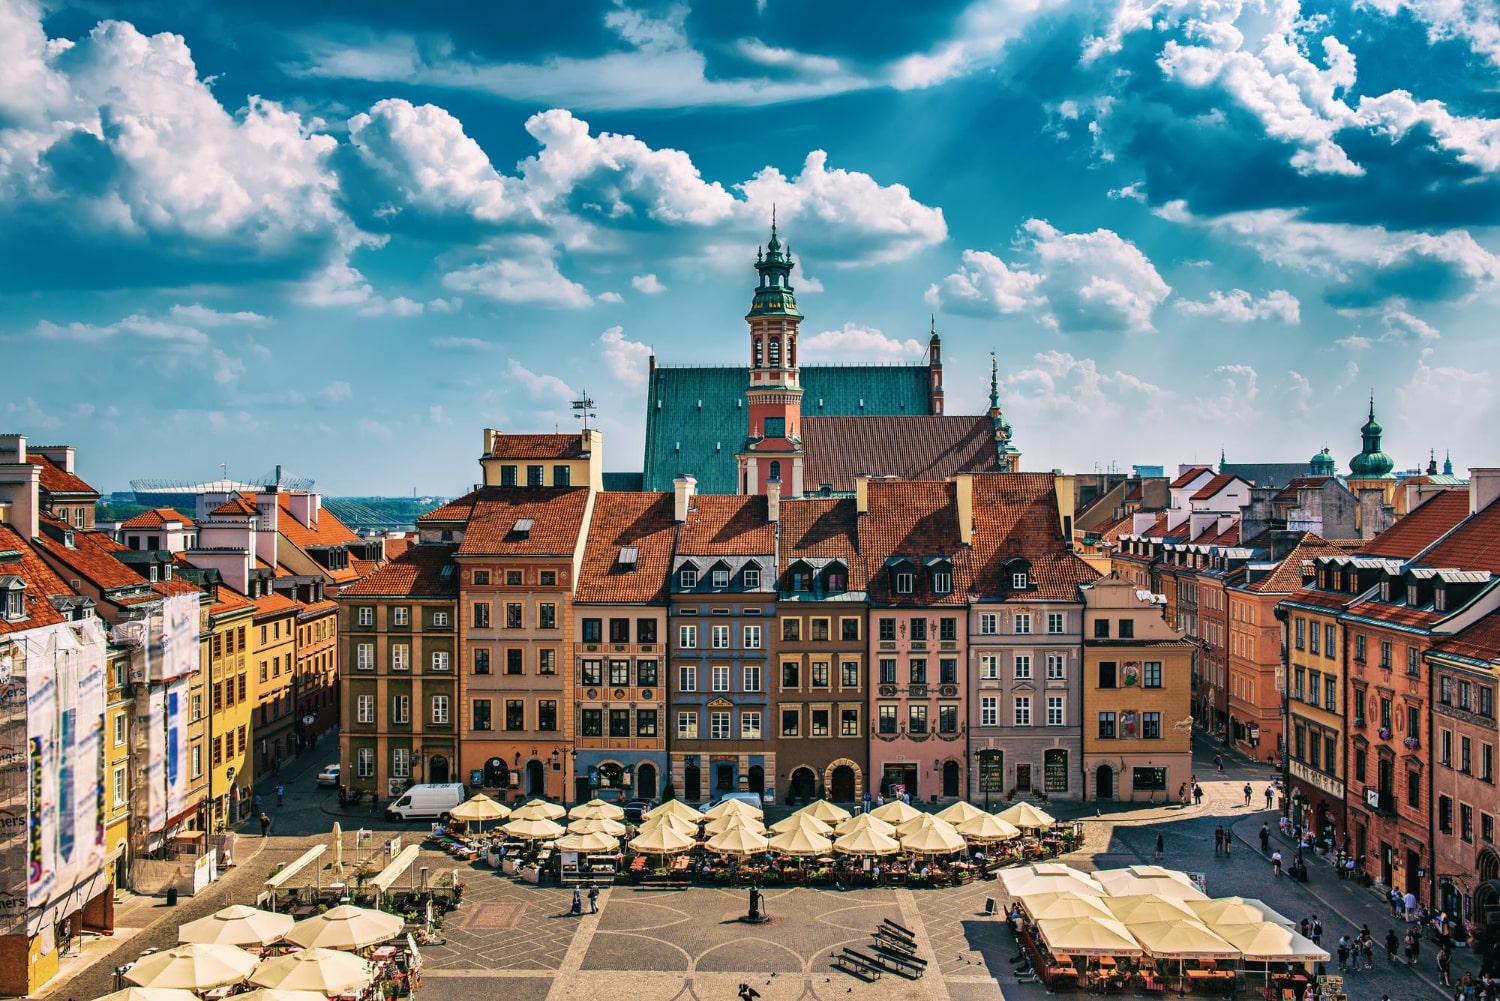 63 interesting facts about Poland